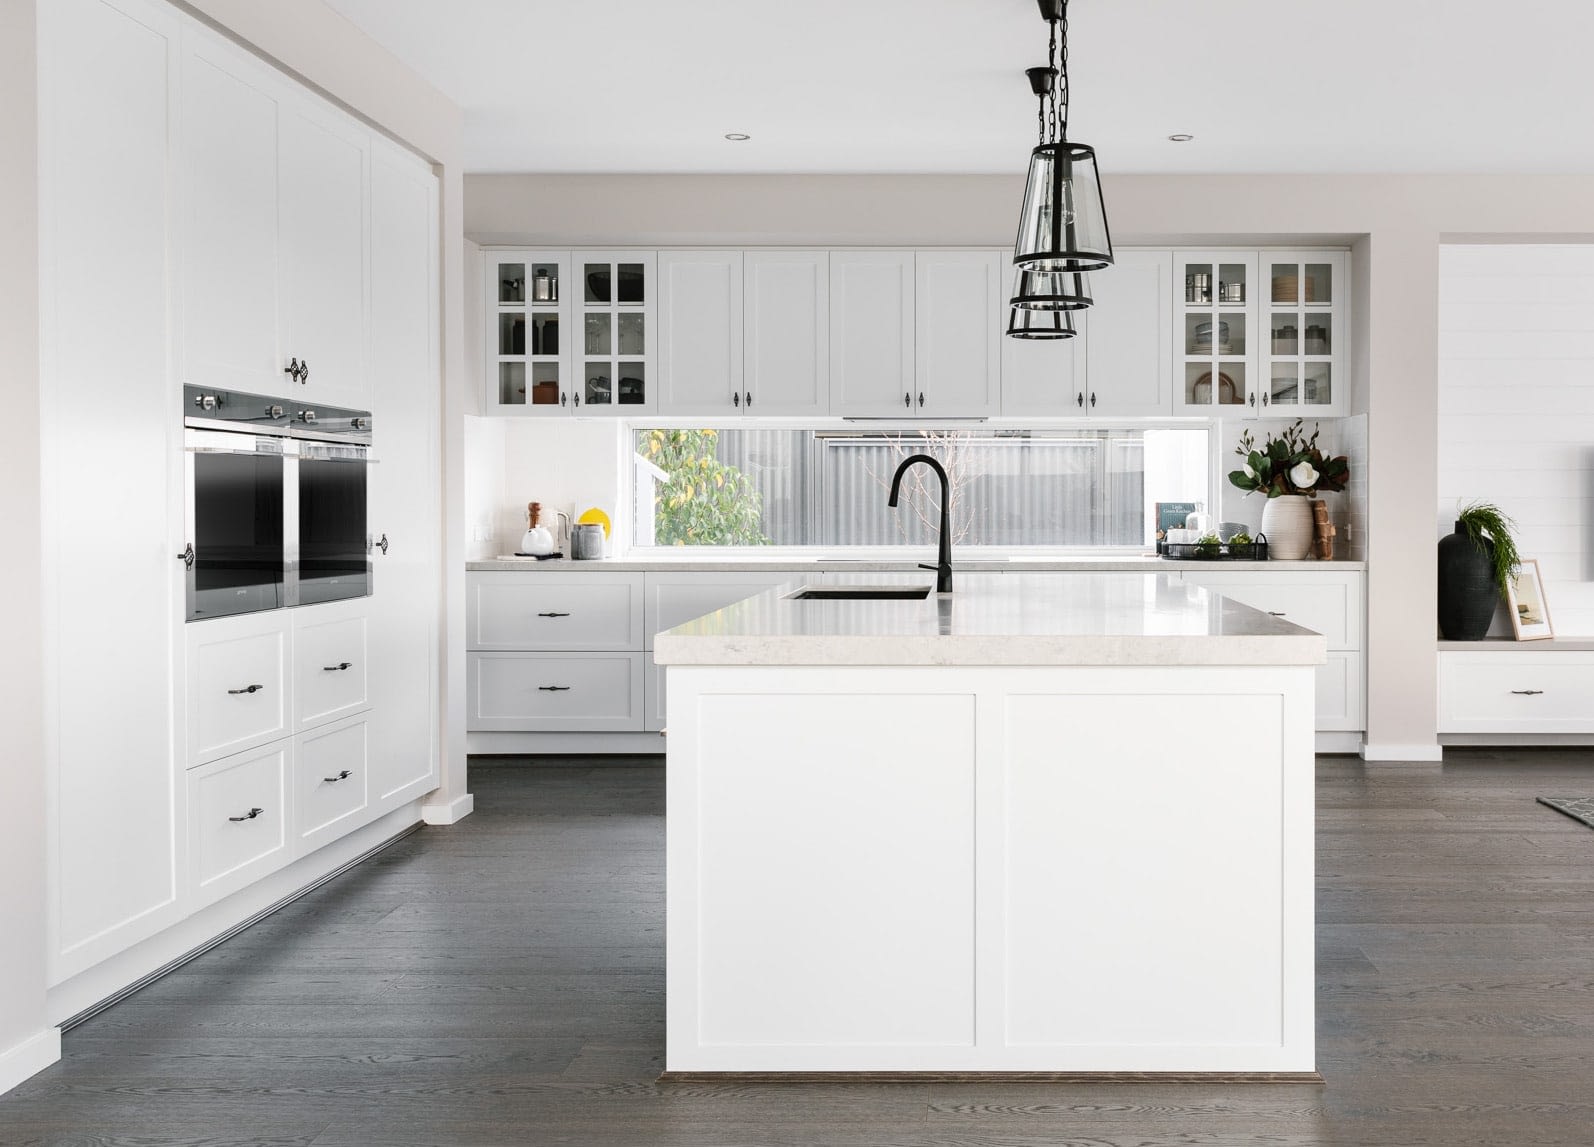 Metricon White Hamptons Kitchen With Shaker Style Cabinets And Black Handles 